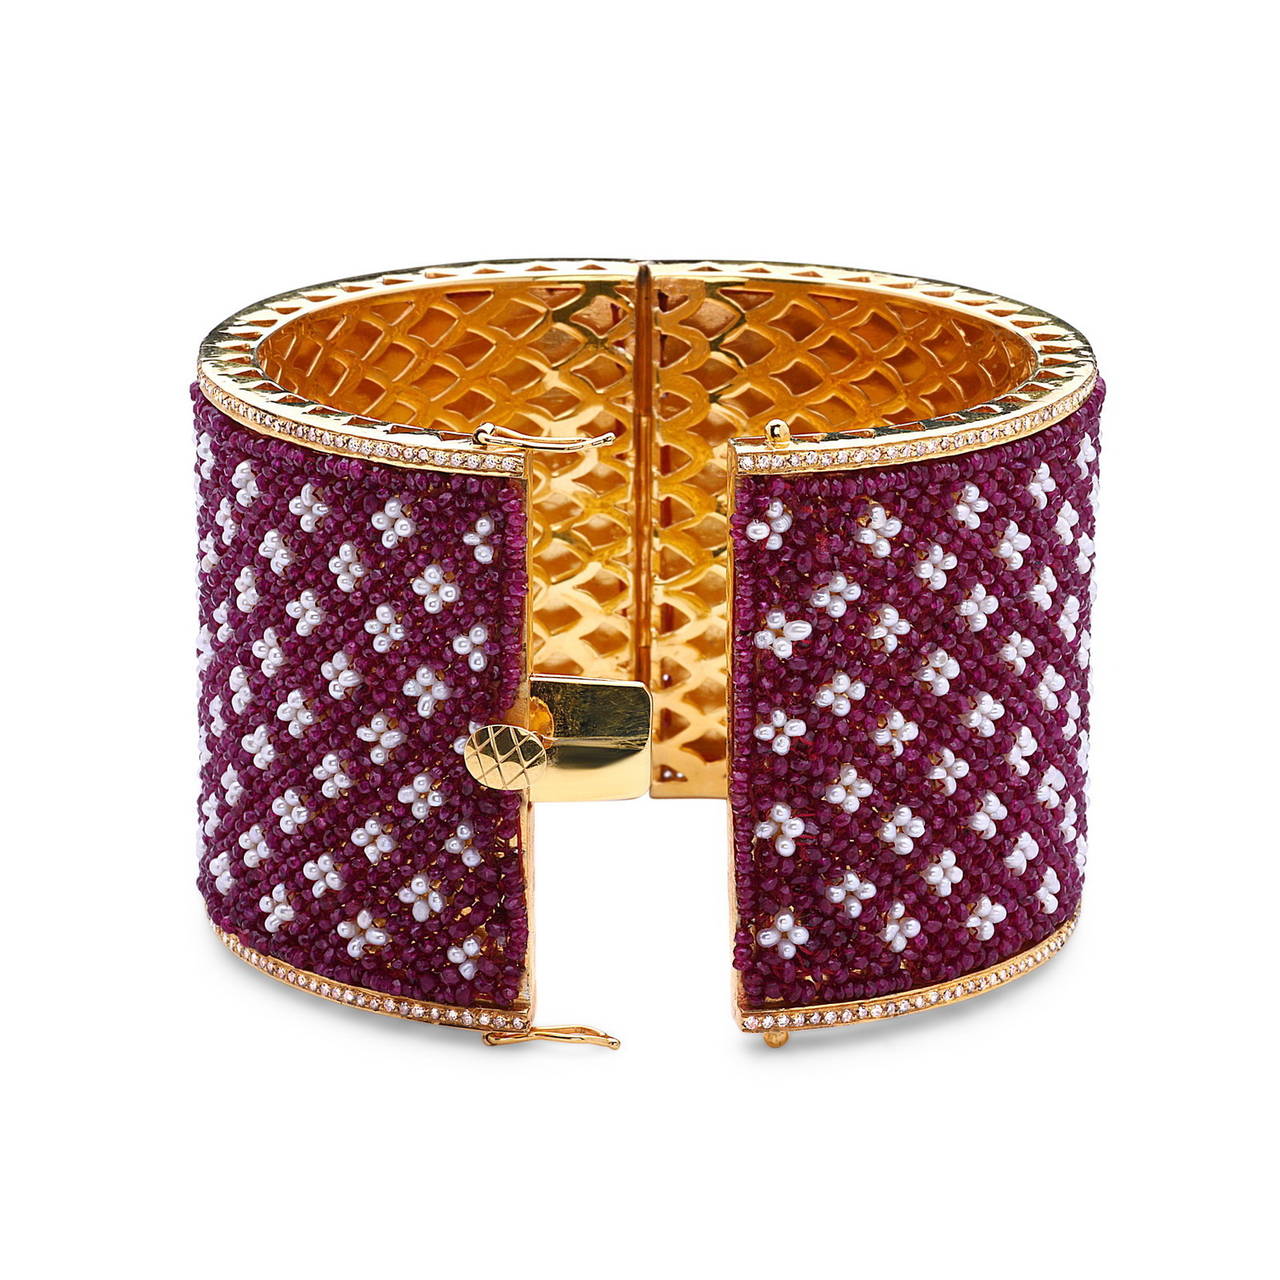 One of It's Kind 14K Yellow Gold Ruby & Pearl hand sewn 2 inch broad bangle with beautiful hand carved gold design inside the bangle. Total of 103.47cts of Ruby, 2.10cts of Diamonds and 70.45cts of Fresh Water Pearls. A truly owners pride